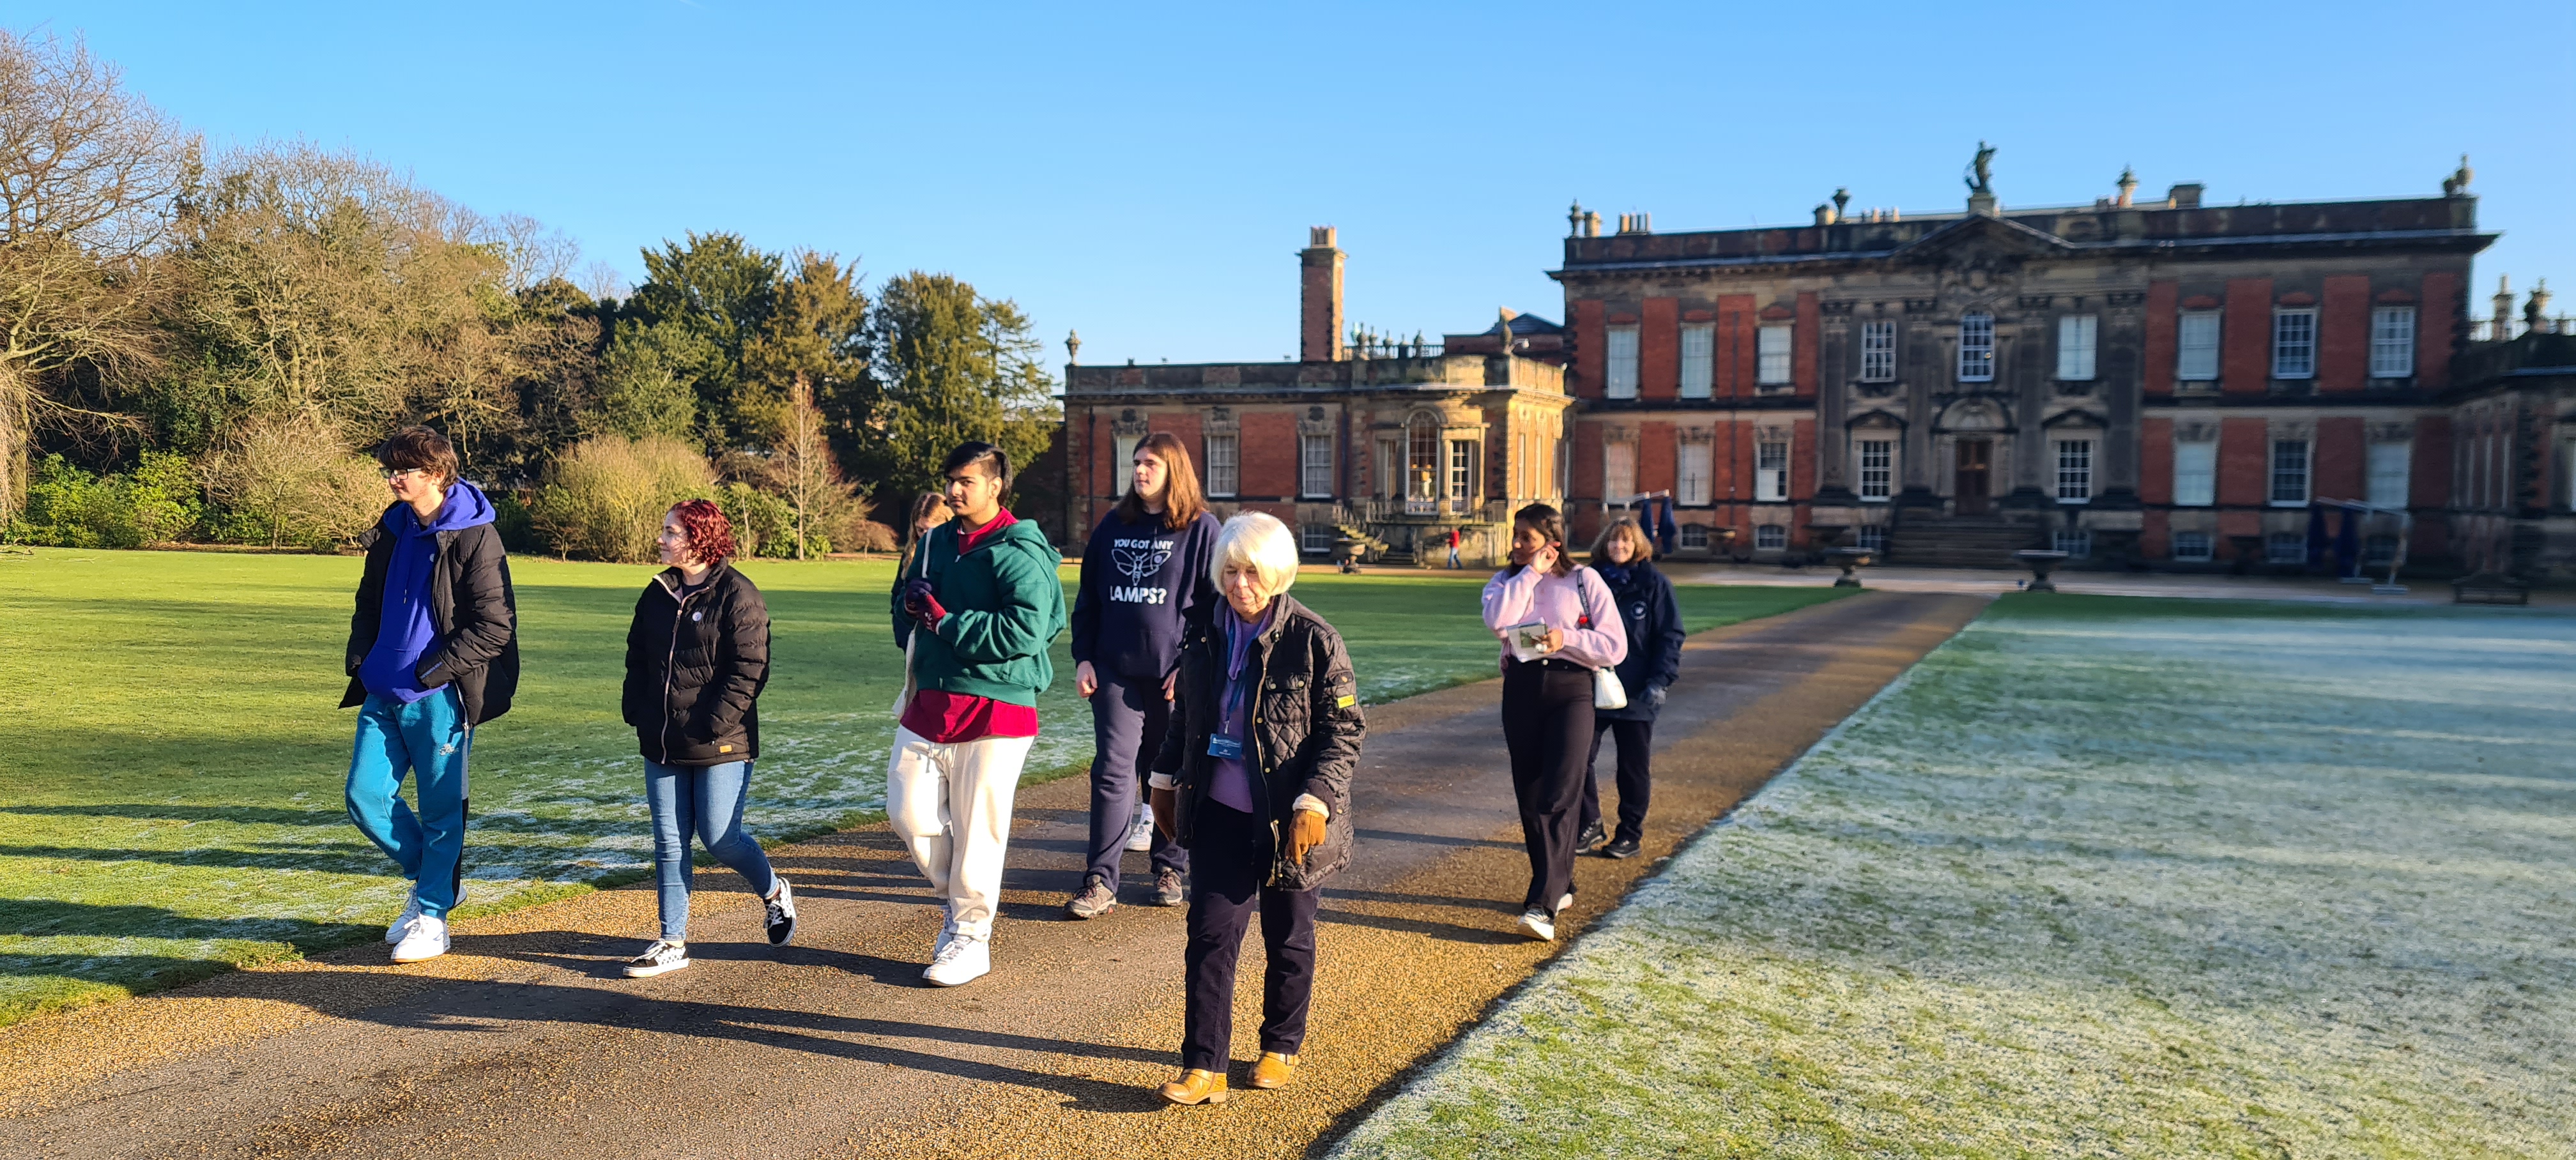 A group of young people stand outside Wentworth Woodhouse on a sunny day.